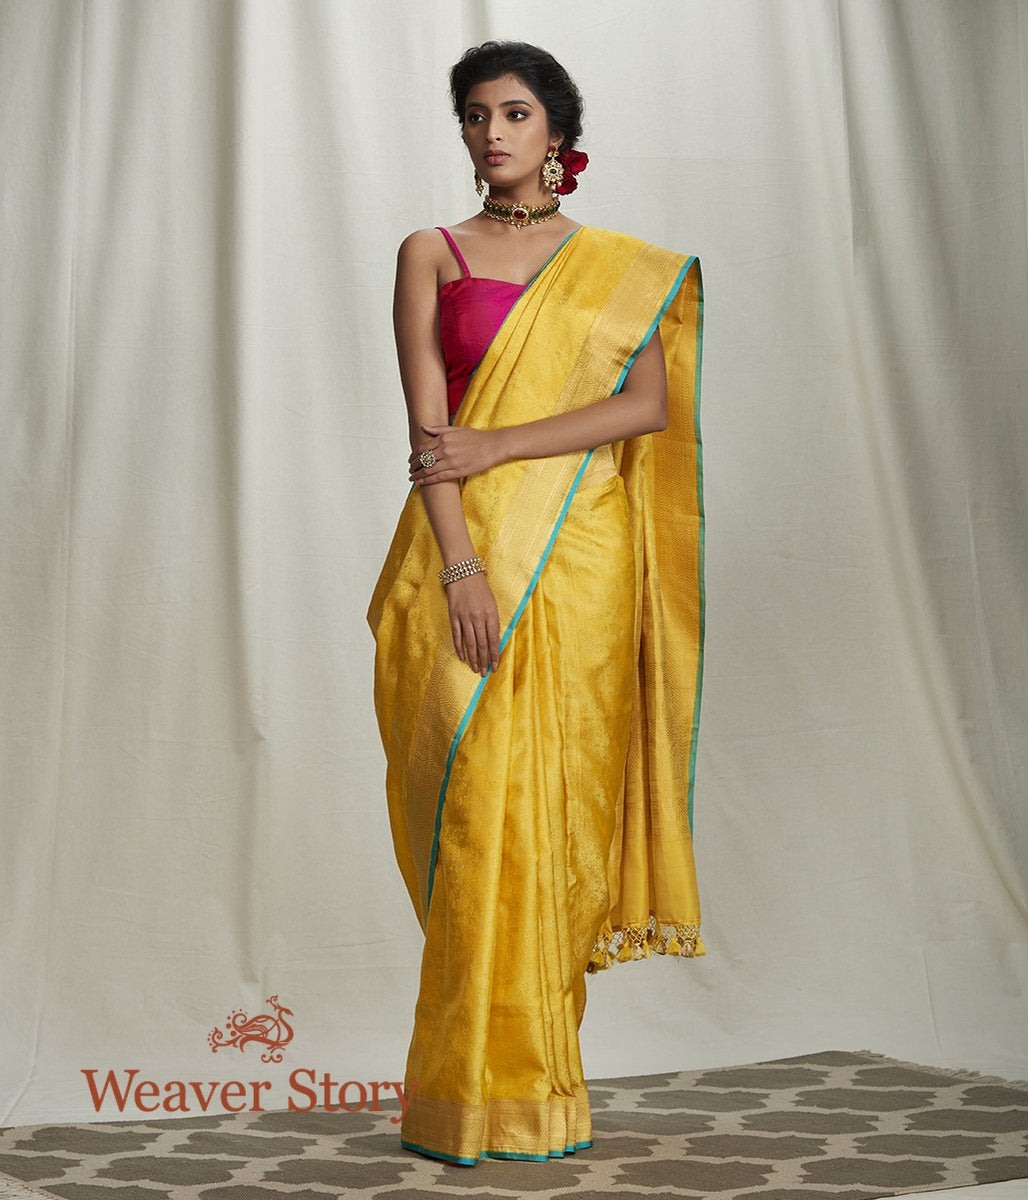 Handwoven_Yellow_Tanchoi_Saree_with_Gold_Border_WeaverStory_02